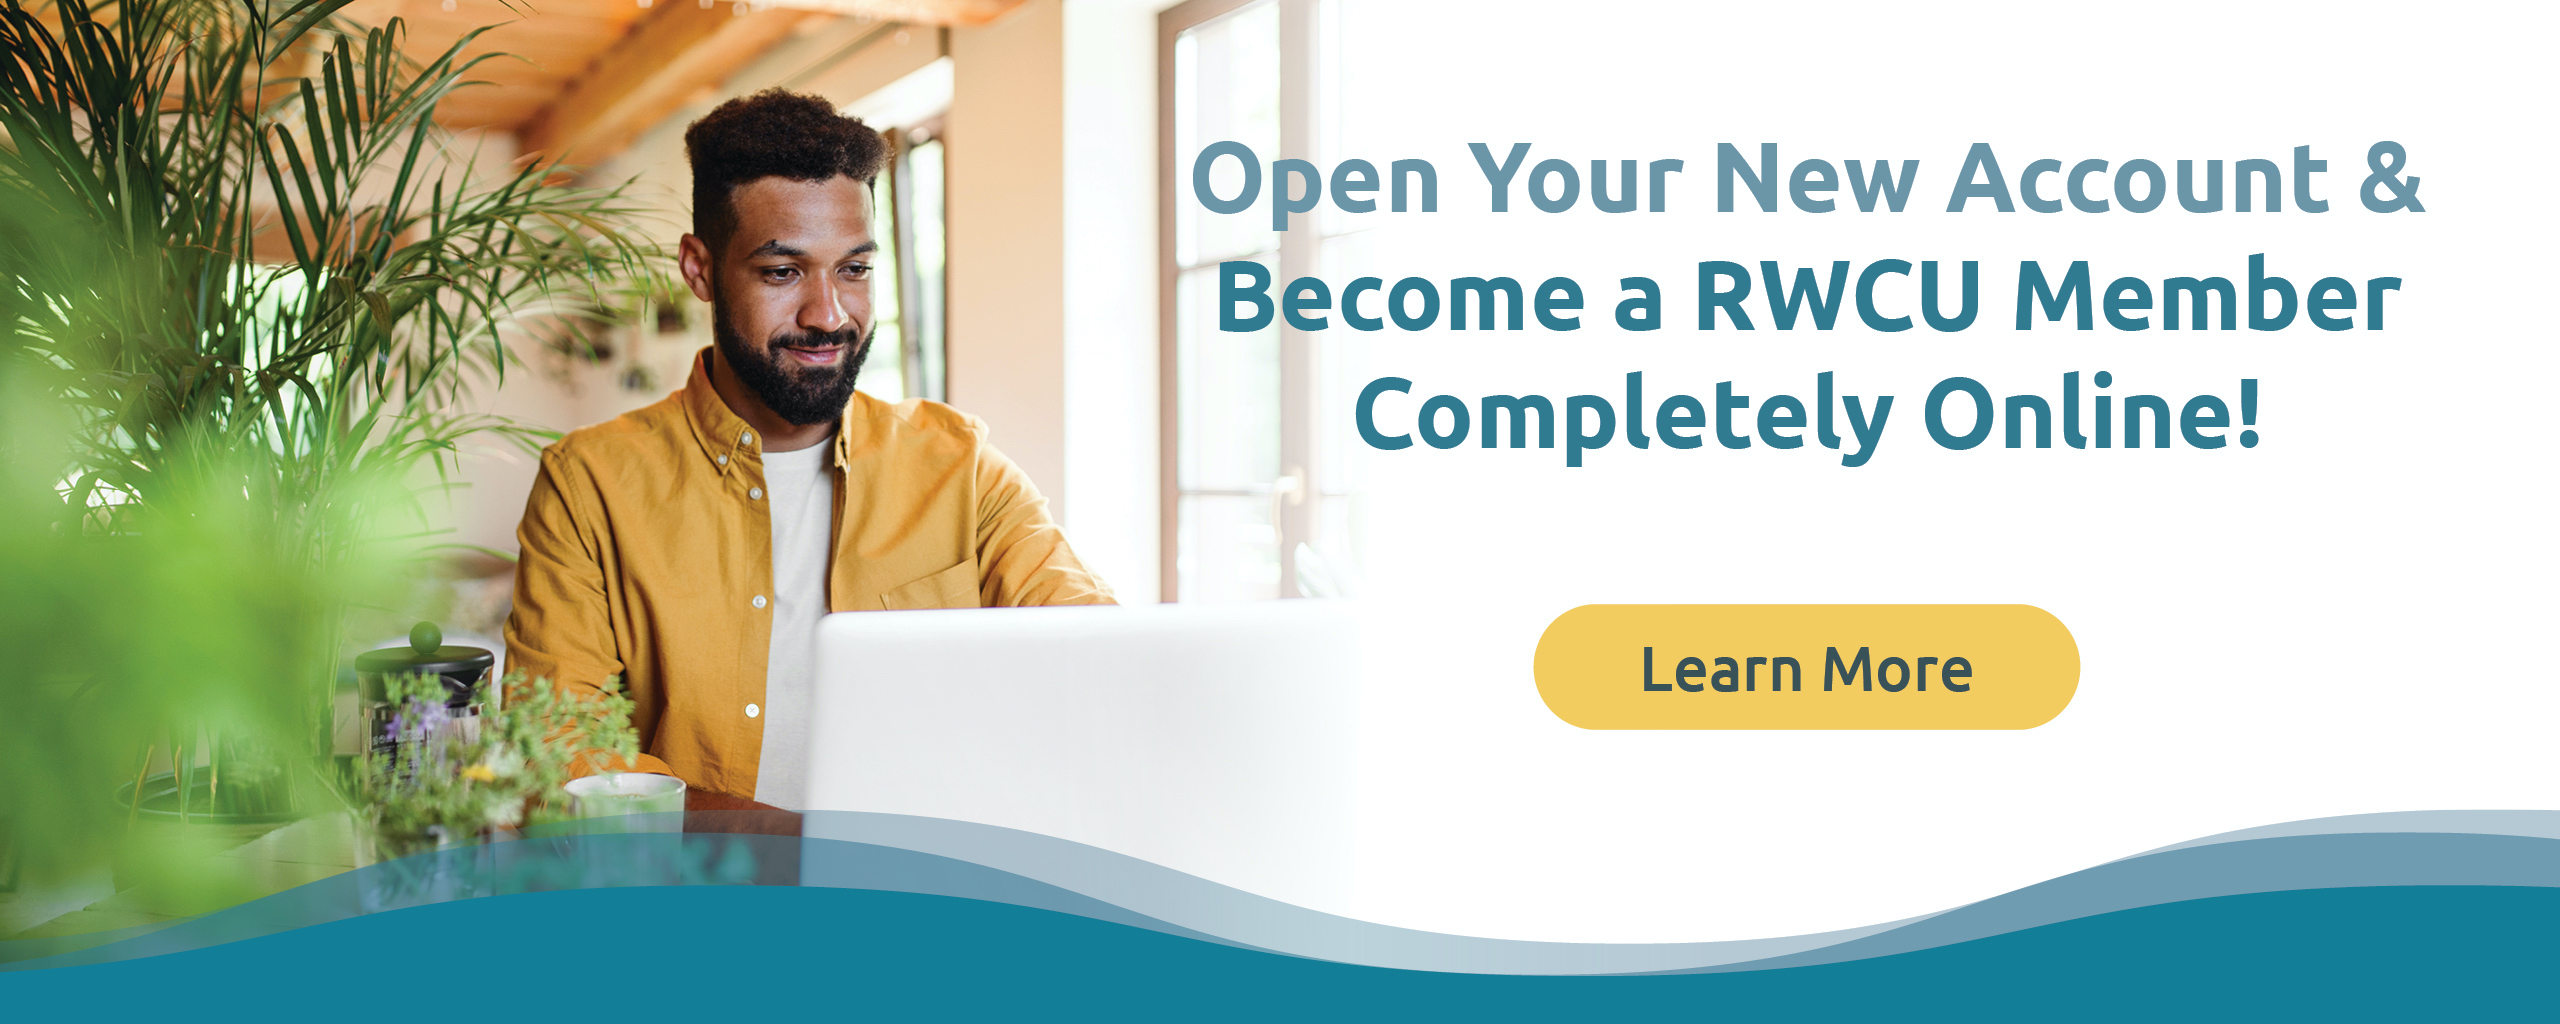 Open your new account and become a RWCU member completely online!
Learn More